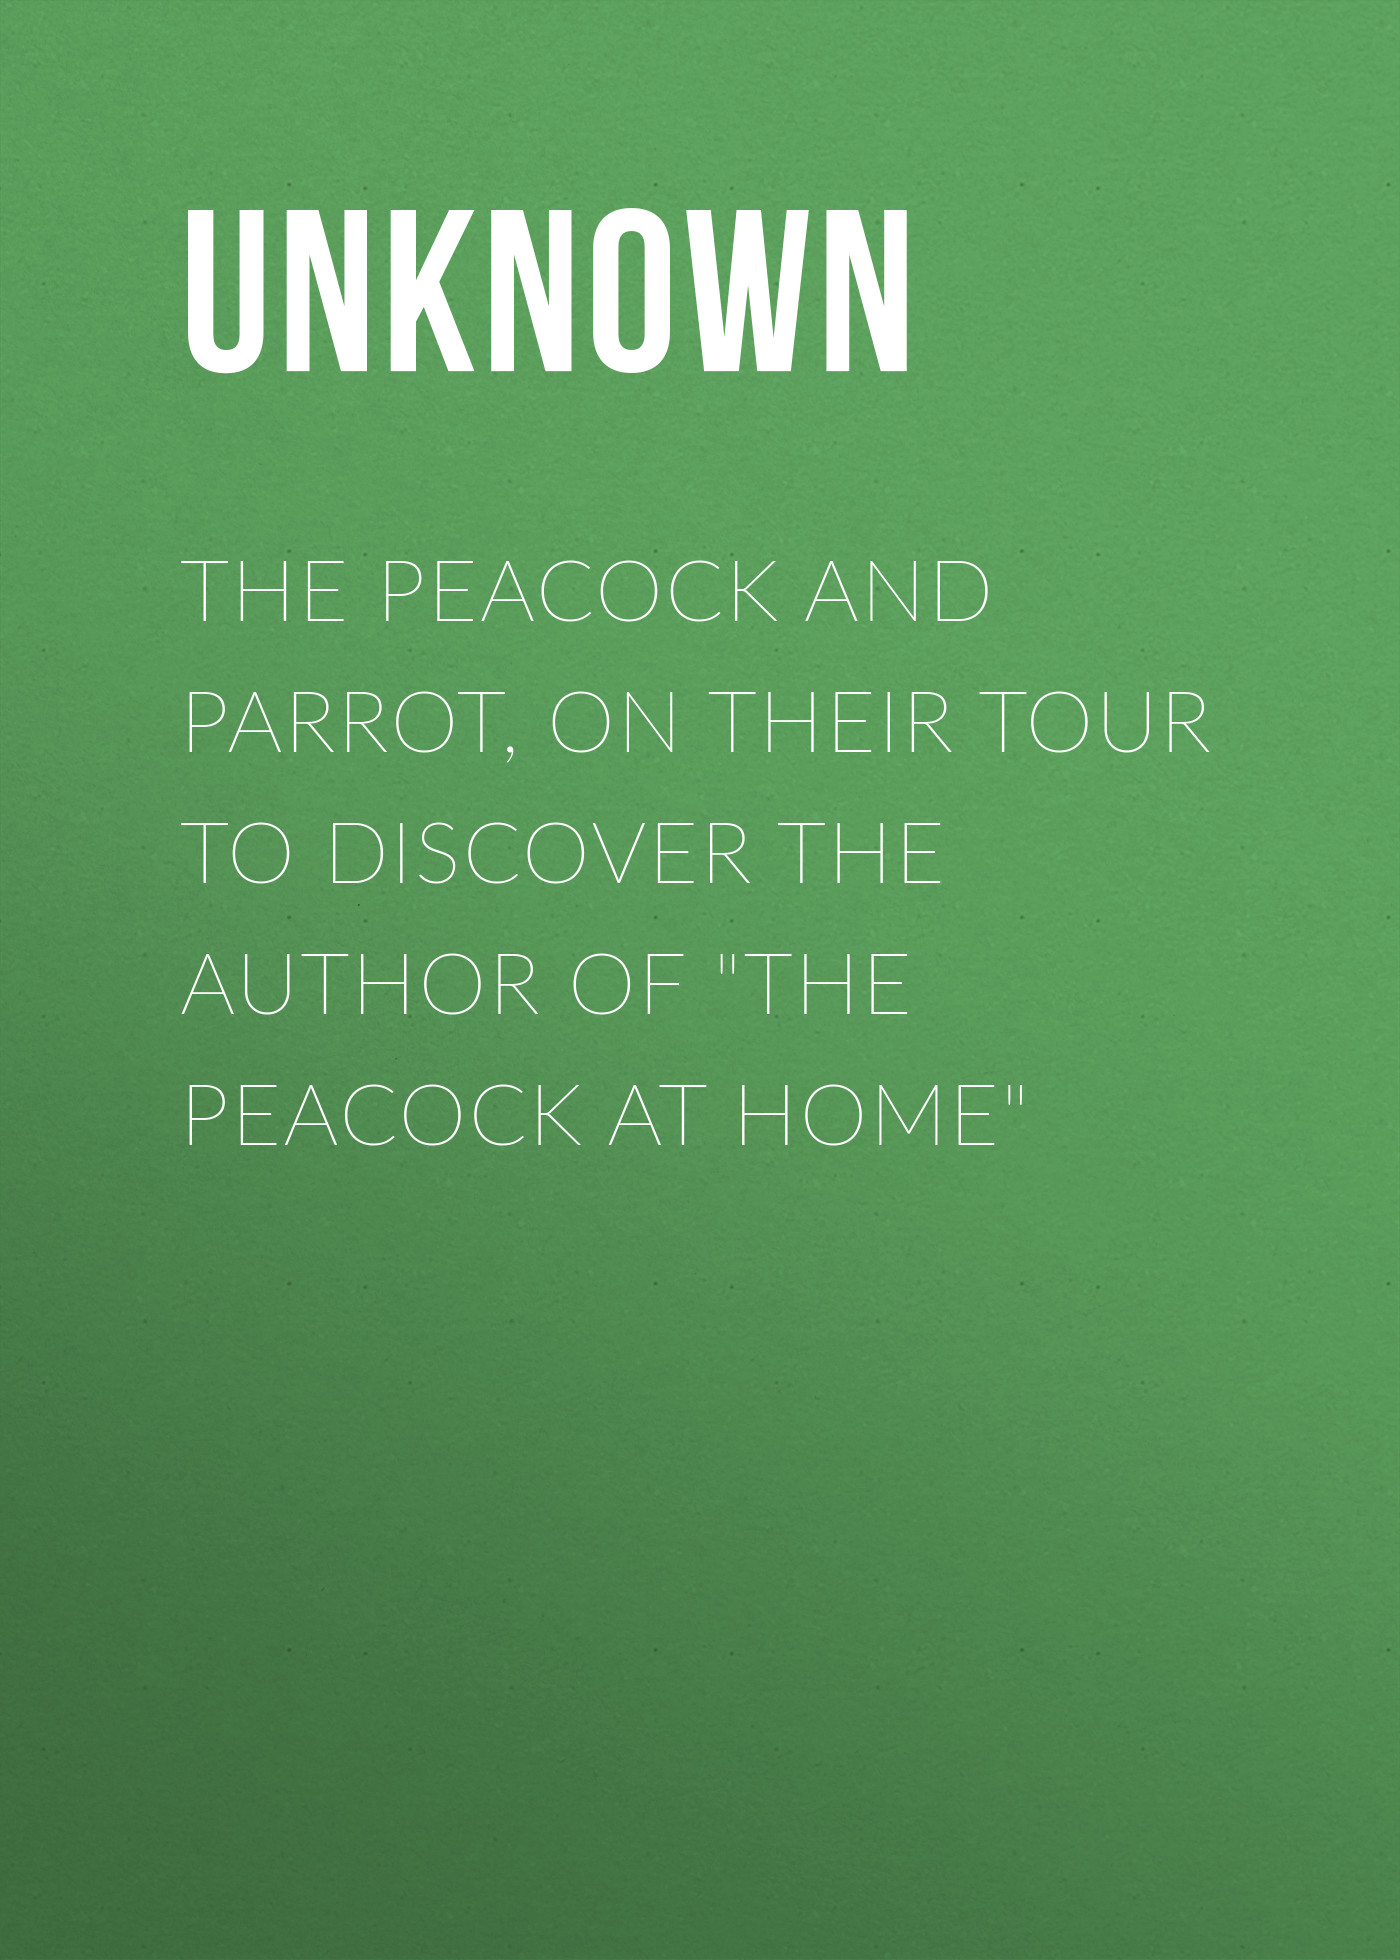 The Peacock and Parrot, on their Tour to Discover the Author of"The Peacock At Home"